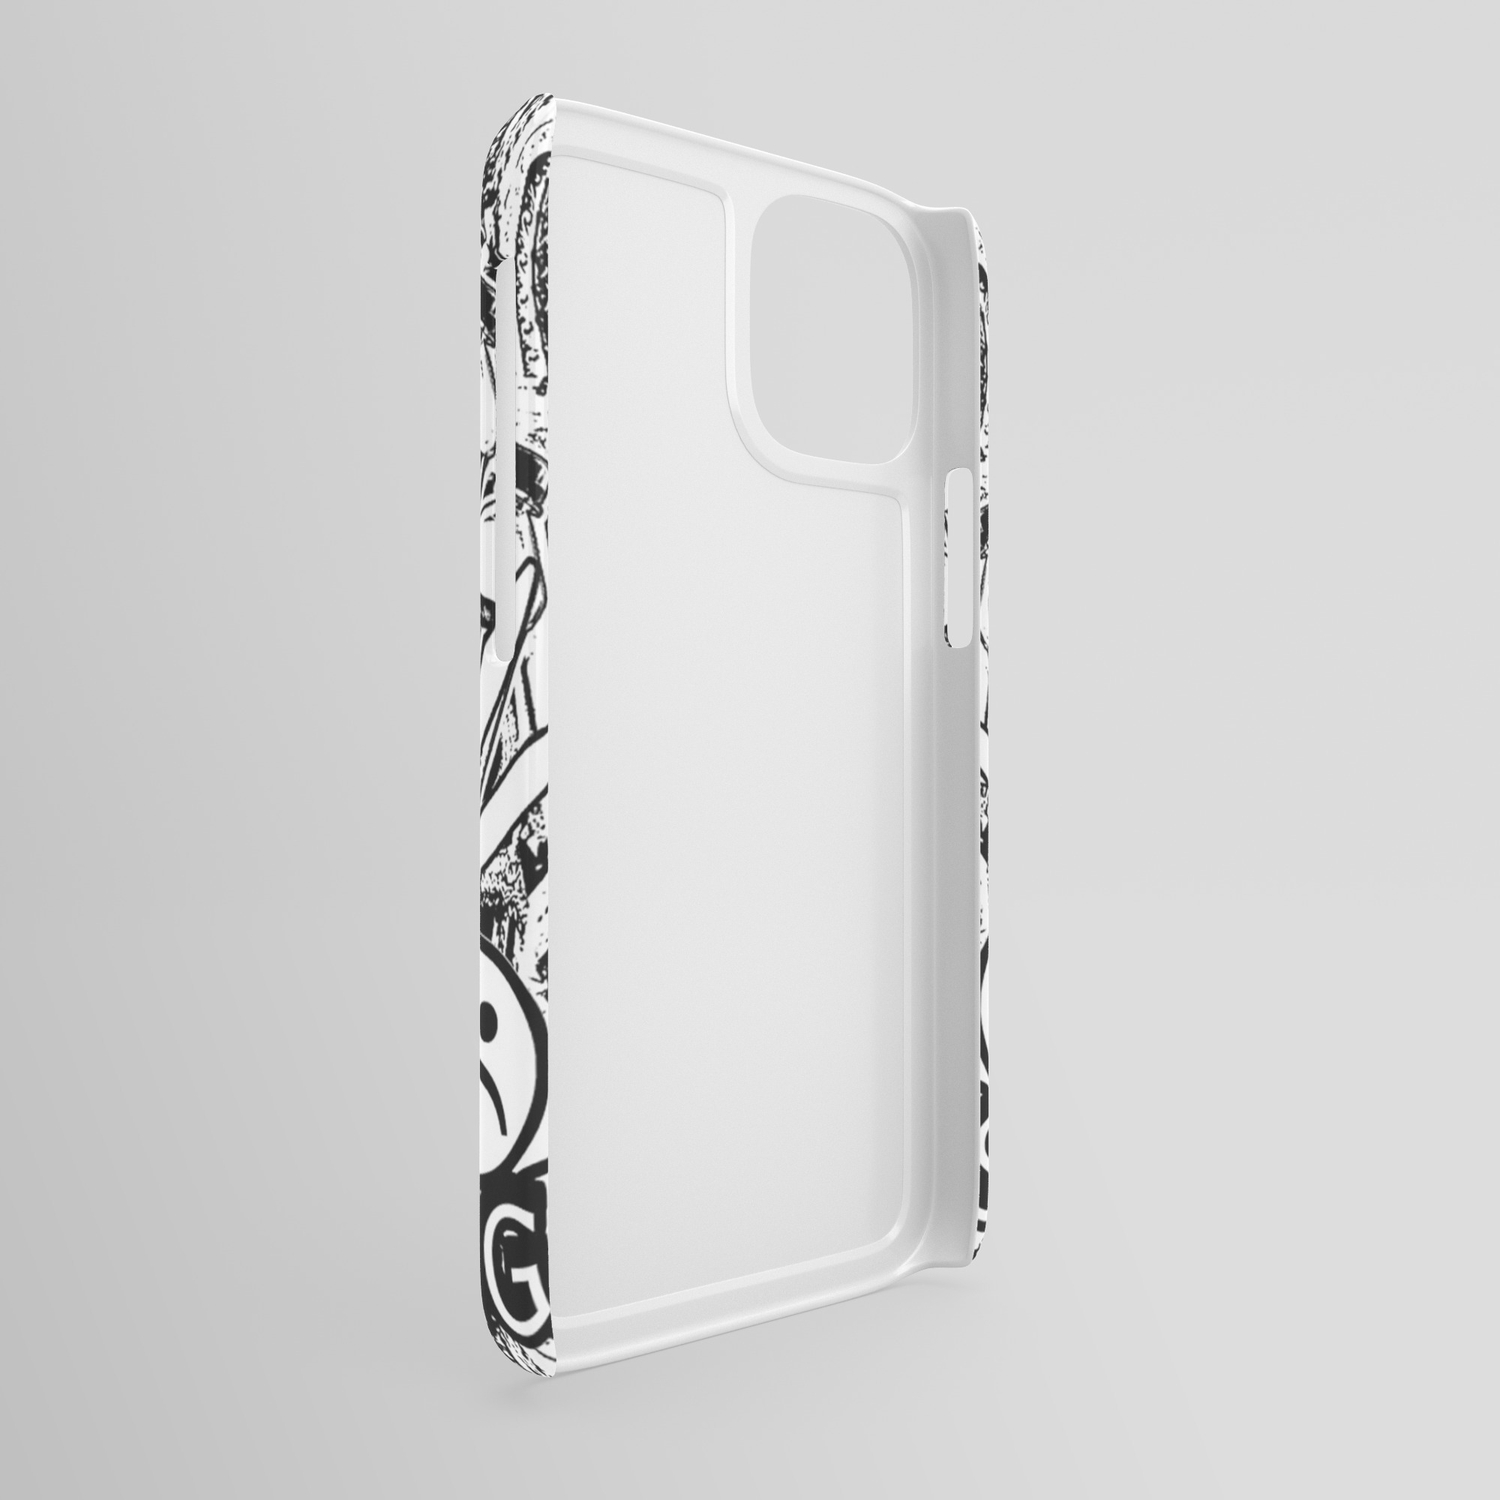 Yung Lean Shield Gang Iphone Case By Yvngslum Society6